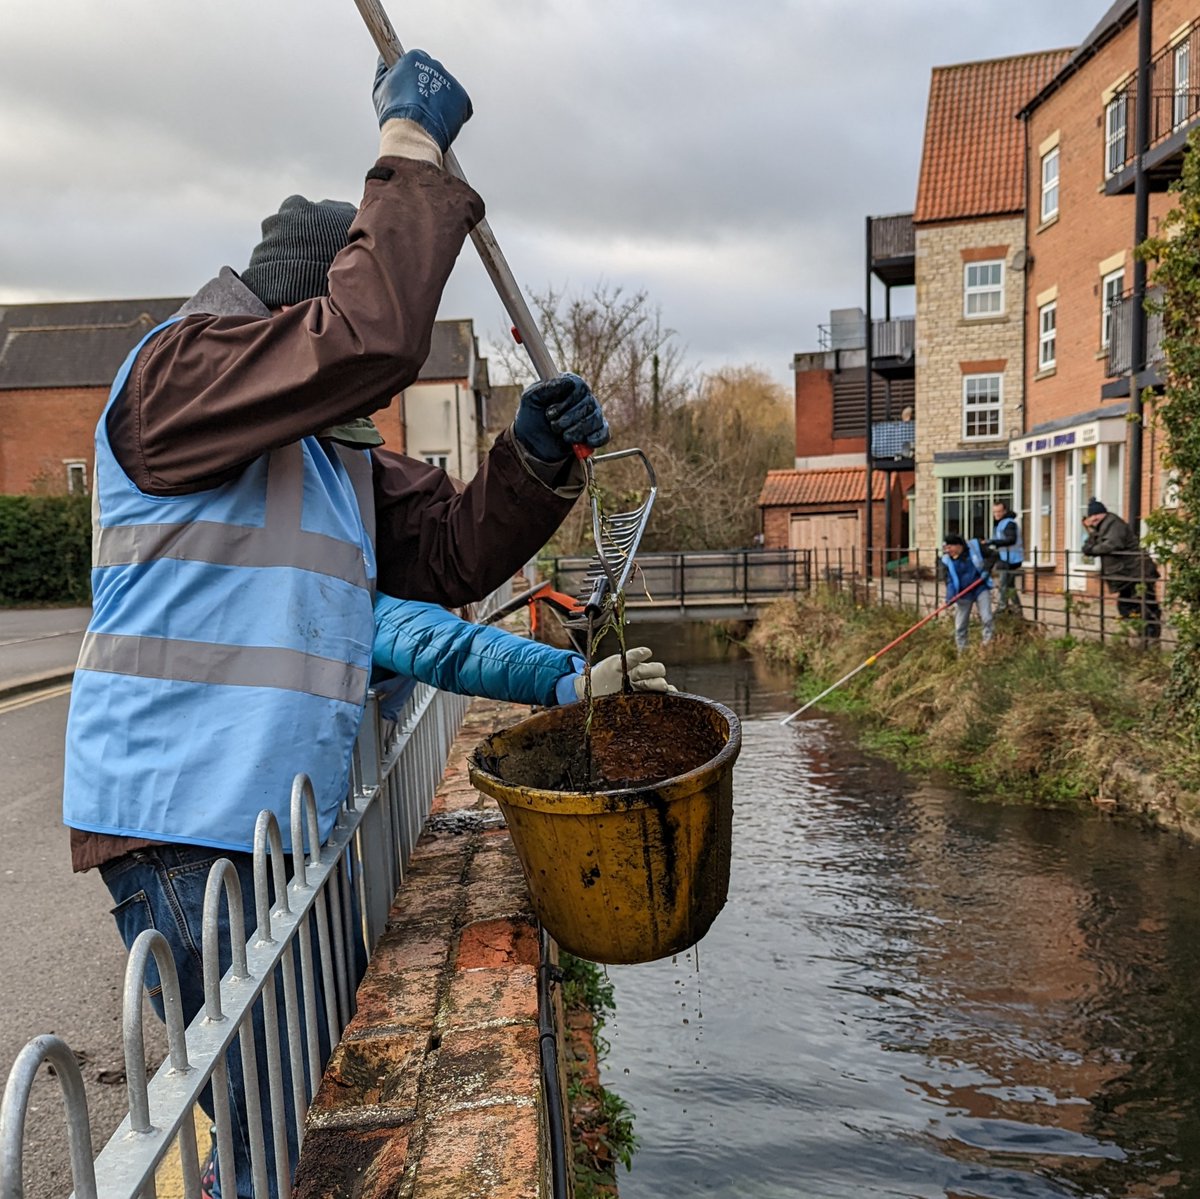 Sleaford's RiverCare team, the River Slea Clean Up group, were out in force on Sunday, with 20 #LitterHeores collecting litter through the town centre, close to the River Slea corridor💙Great skills from volunteers with the extendable poles retrieving items from the river 🙌